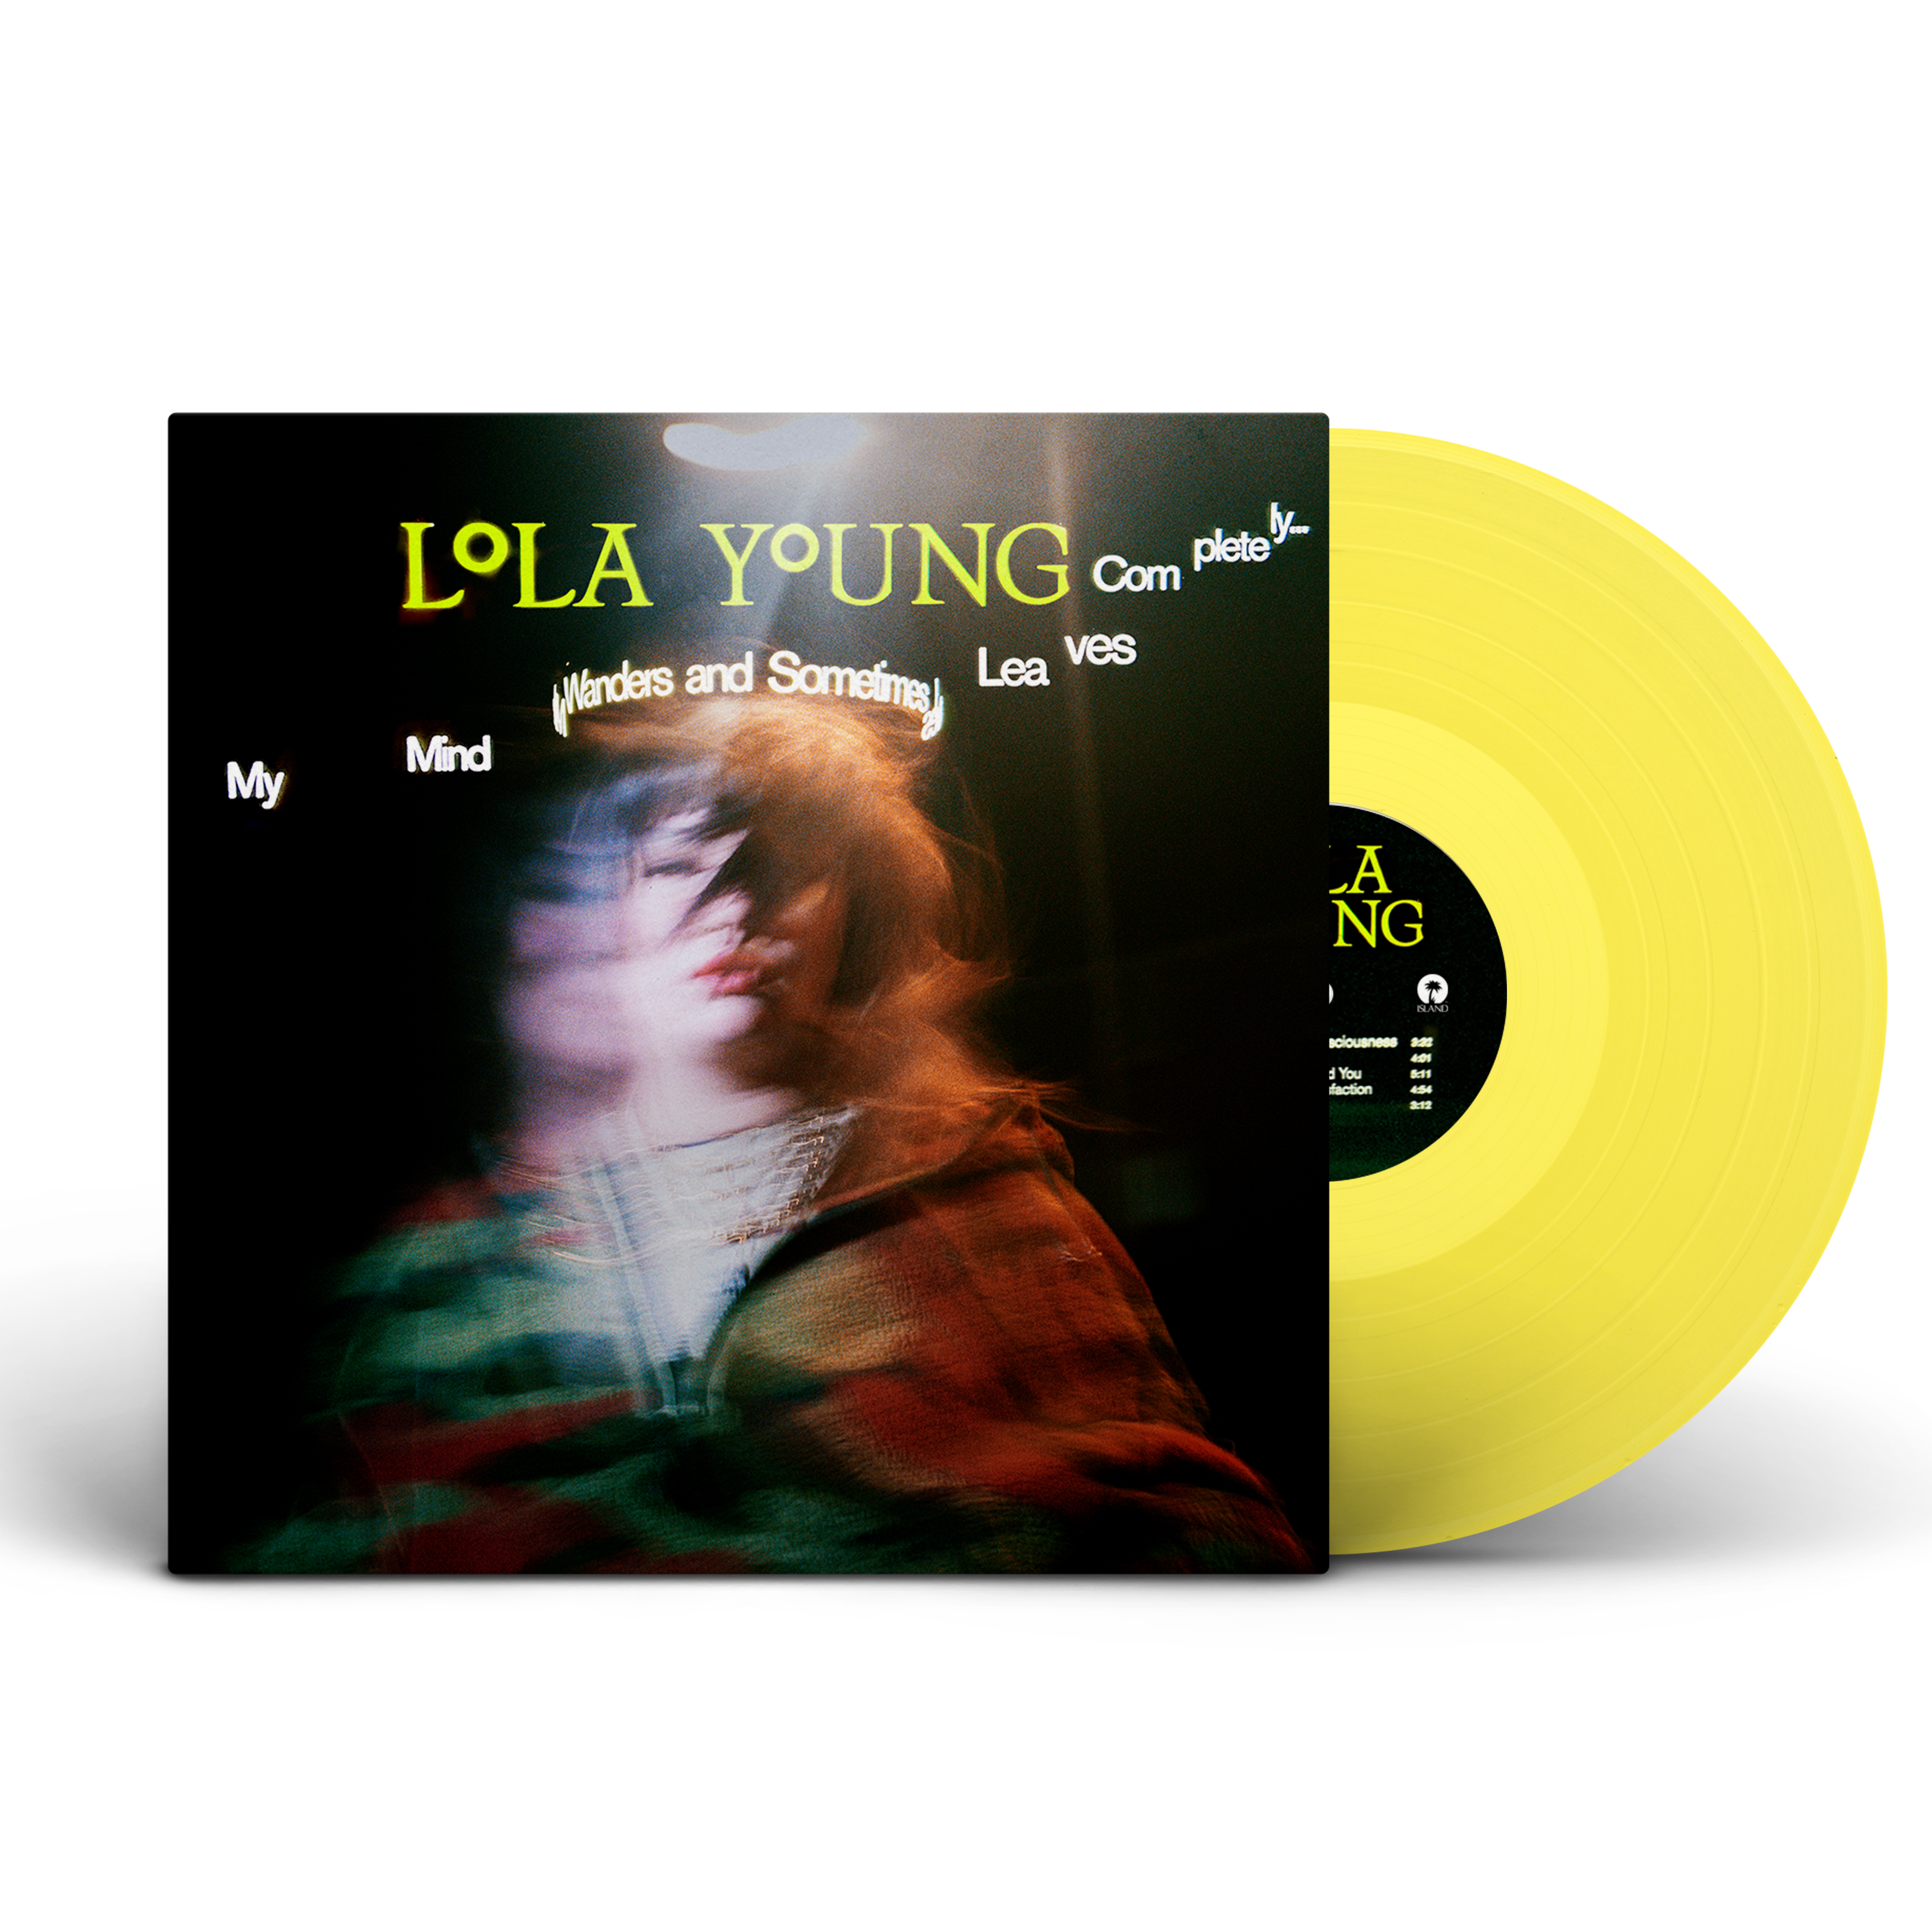 Lola Young - My Mind Wanders and Sometimes Leaves Completely: Translucent Yellow LP 